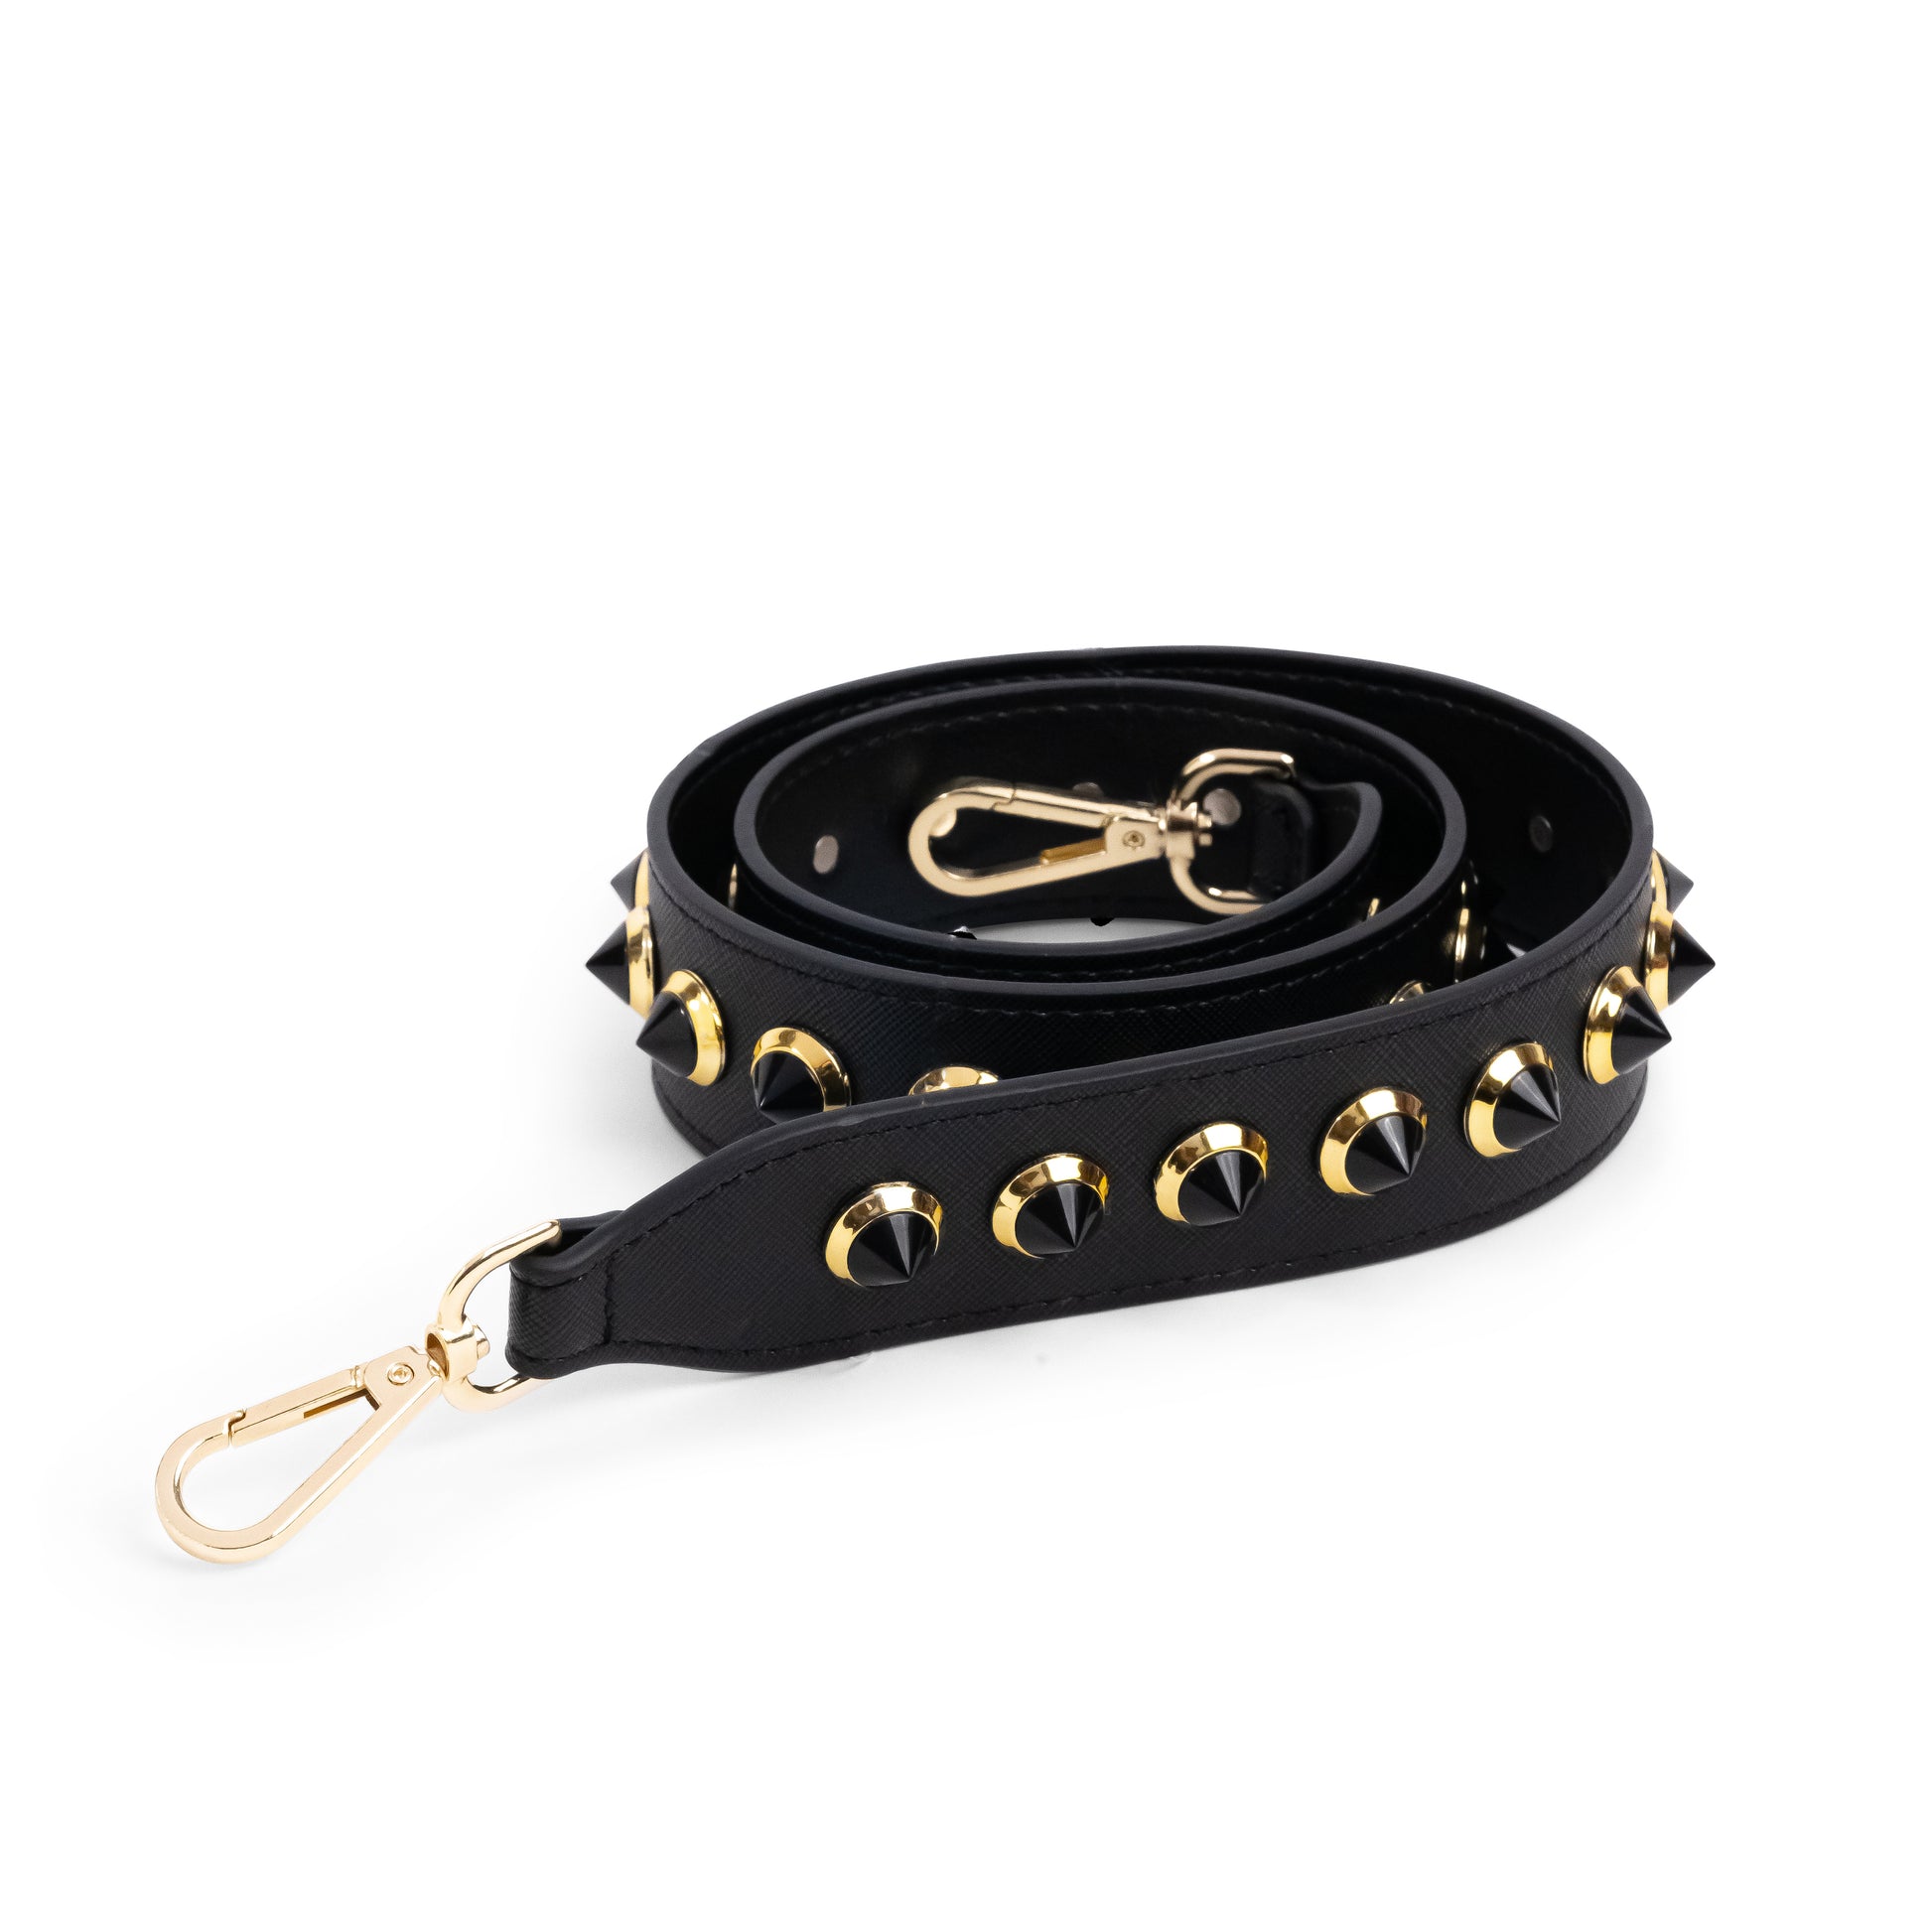 Rolled up black bag strap with multicoloured studs